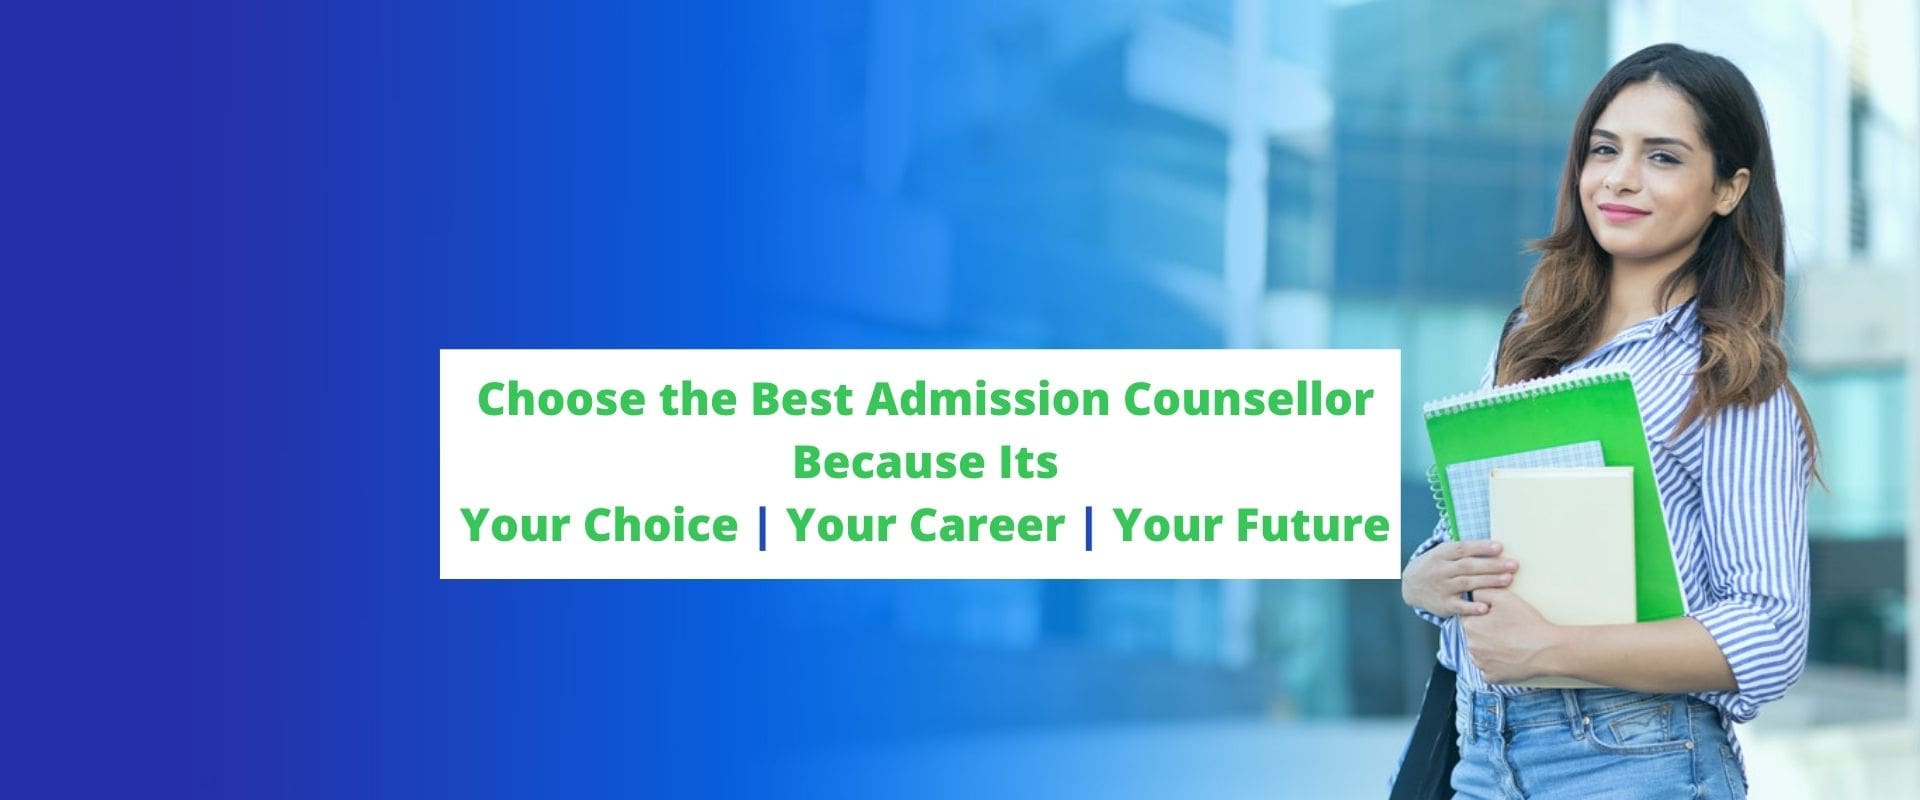 Best School, College, Admission counsellor For B.Tech, B.ed, MBA, BCA, B. Bharma, Sharda, Amity, Galgotia University in Greater Noida NCR